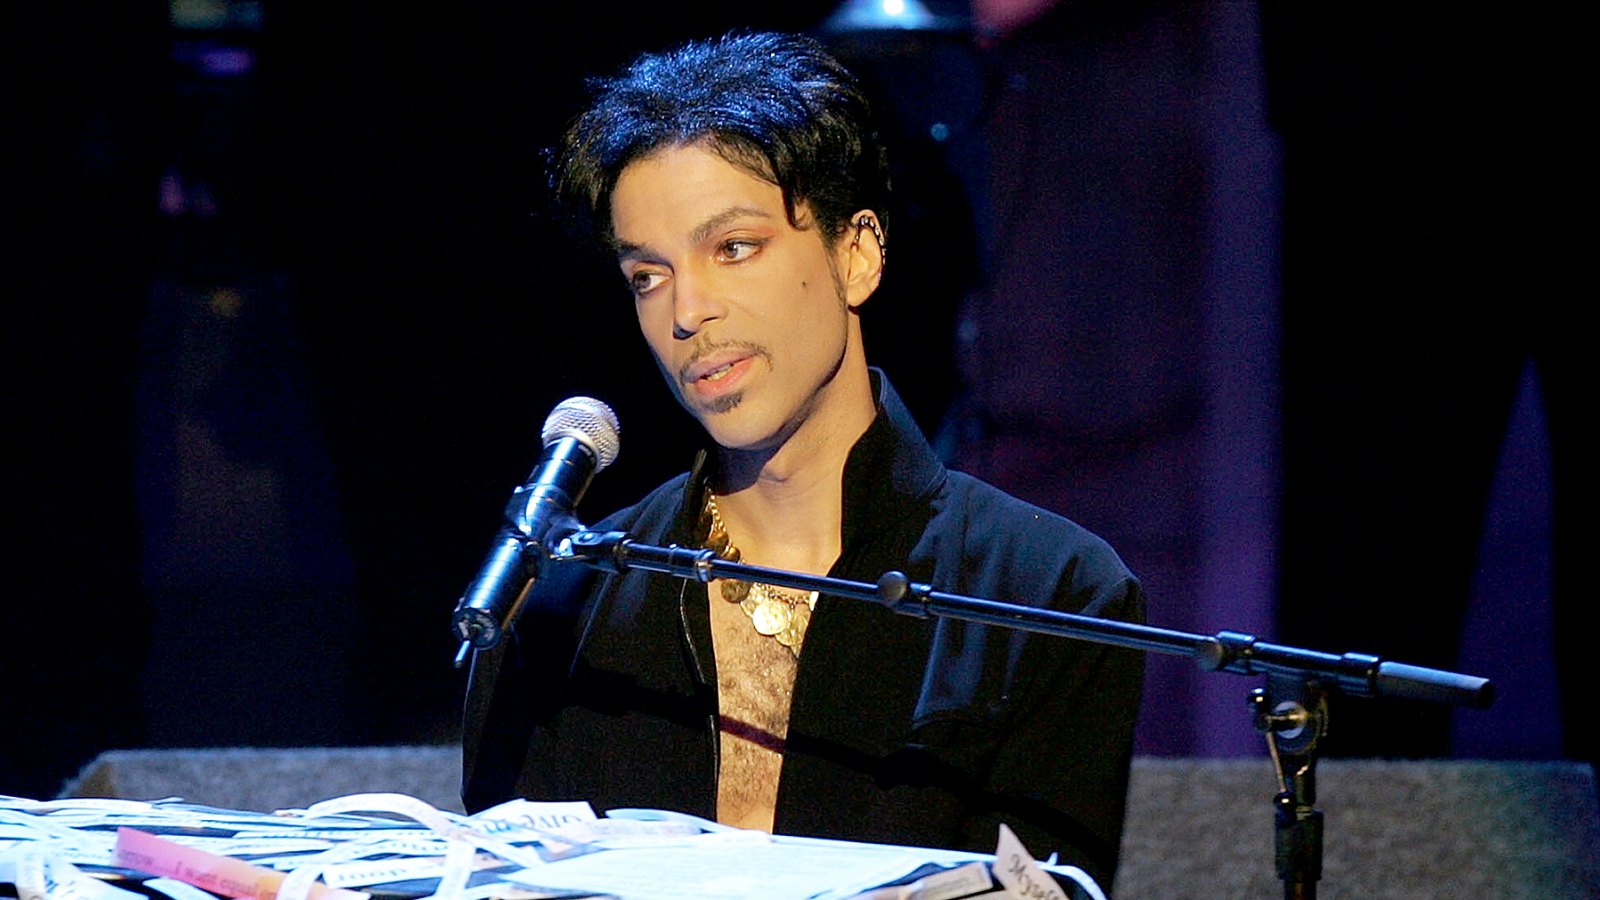 Prince performs on stage at the 36th NAACP Image Awards at the Dorothy Chandler Pavilion on March 19, 2005 in Los Angeles, California.